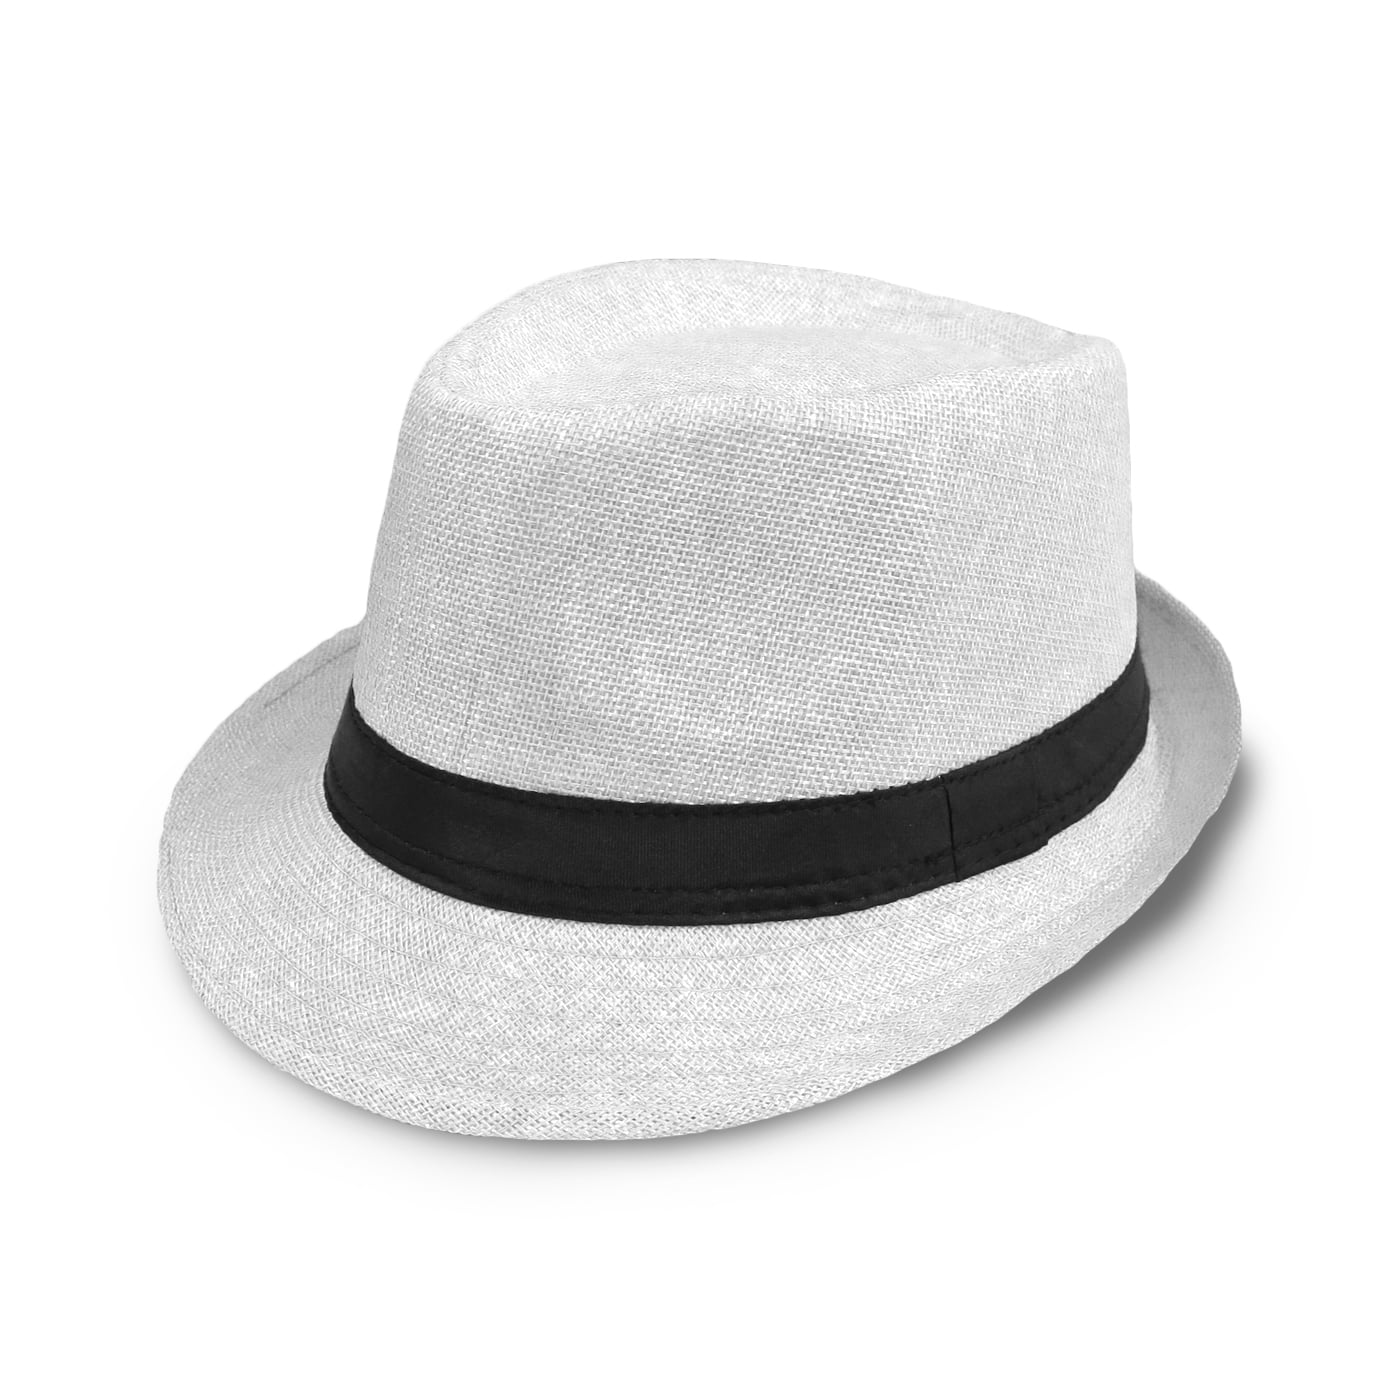 The Hatter Company Tweed Classic Cuban Fedora w/ Lace Band 